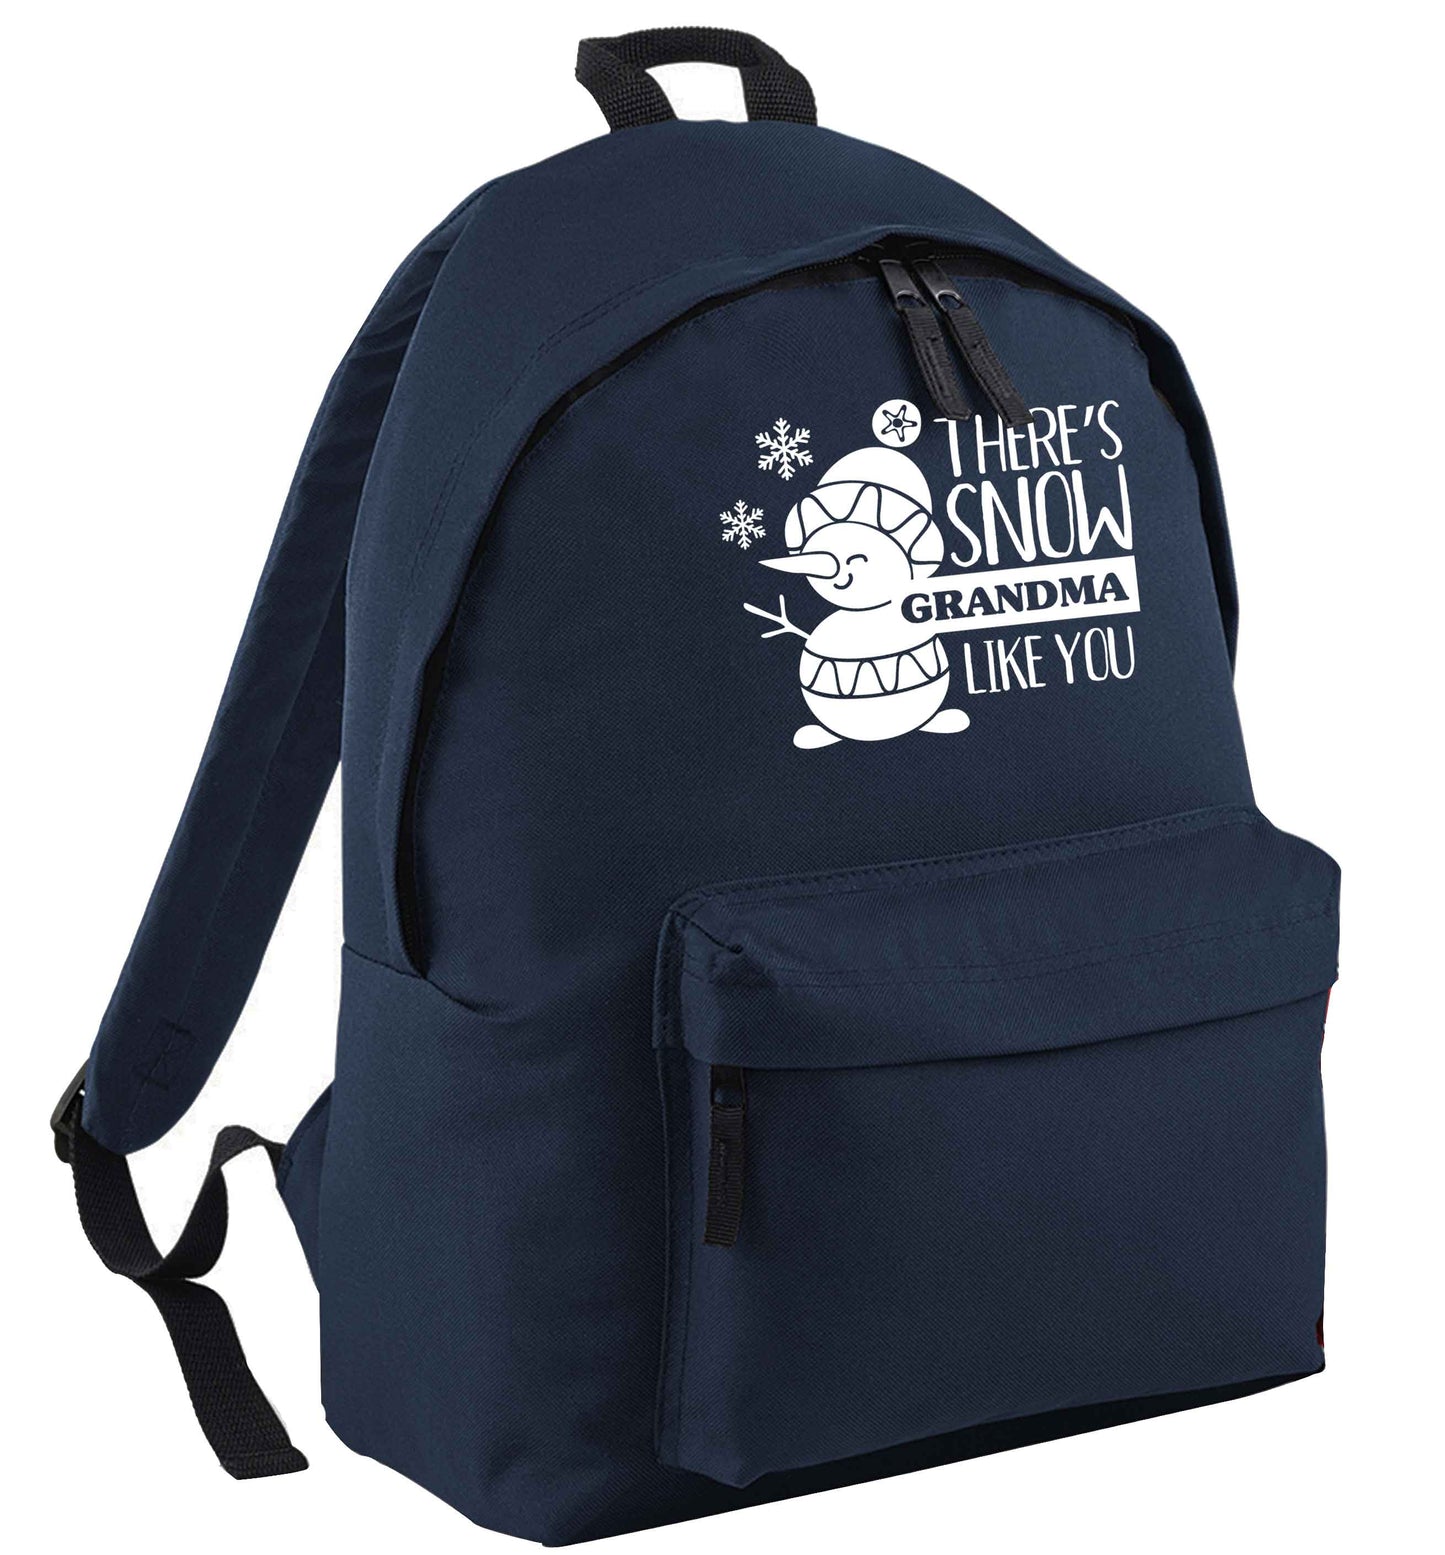 There's snow grandma like you navy adults backpack